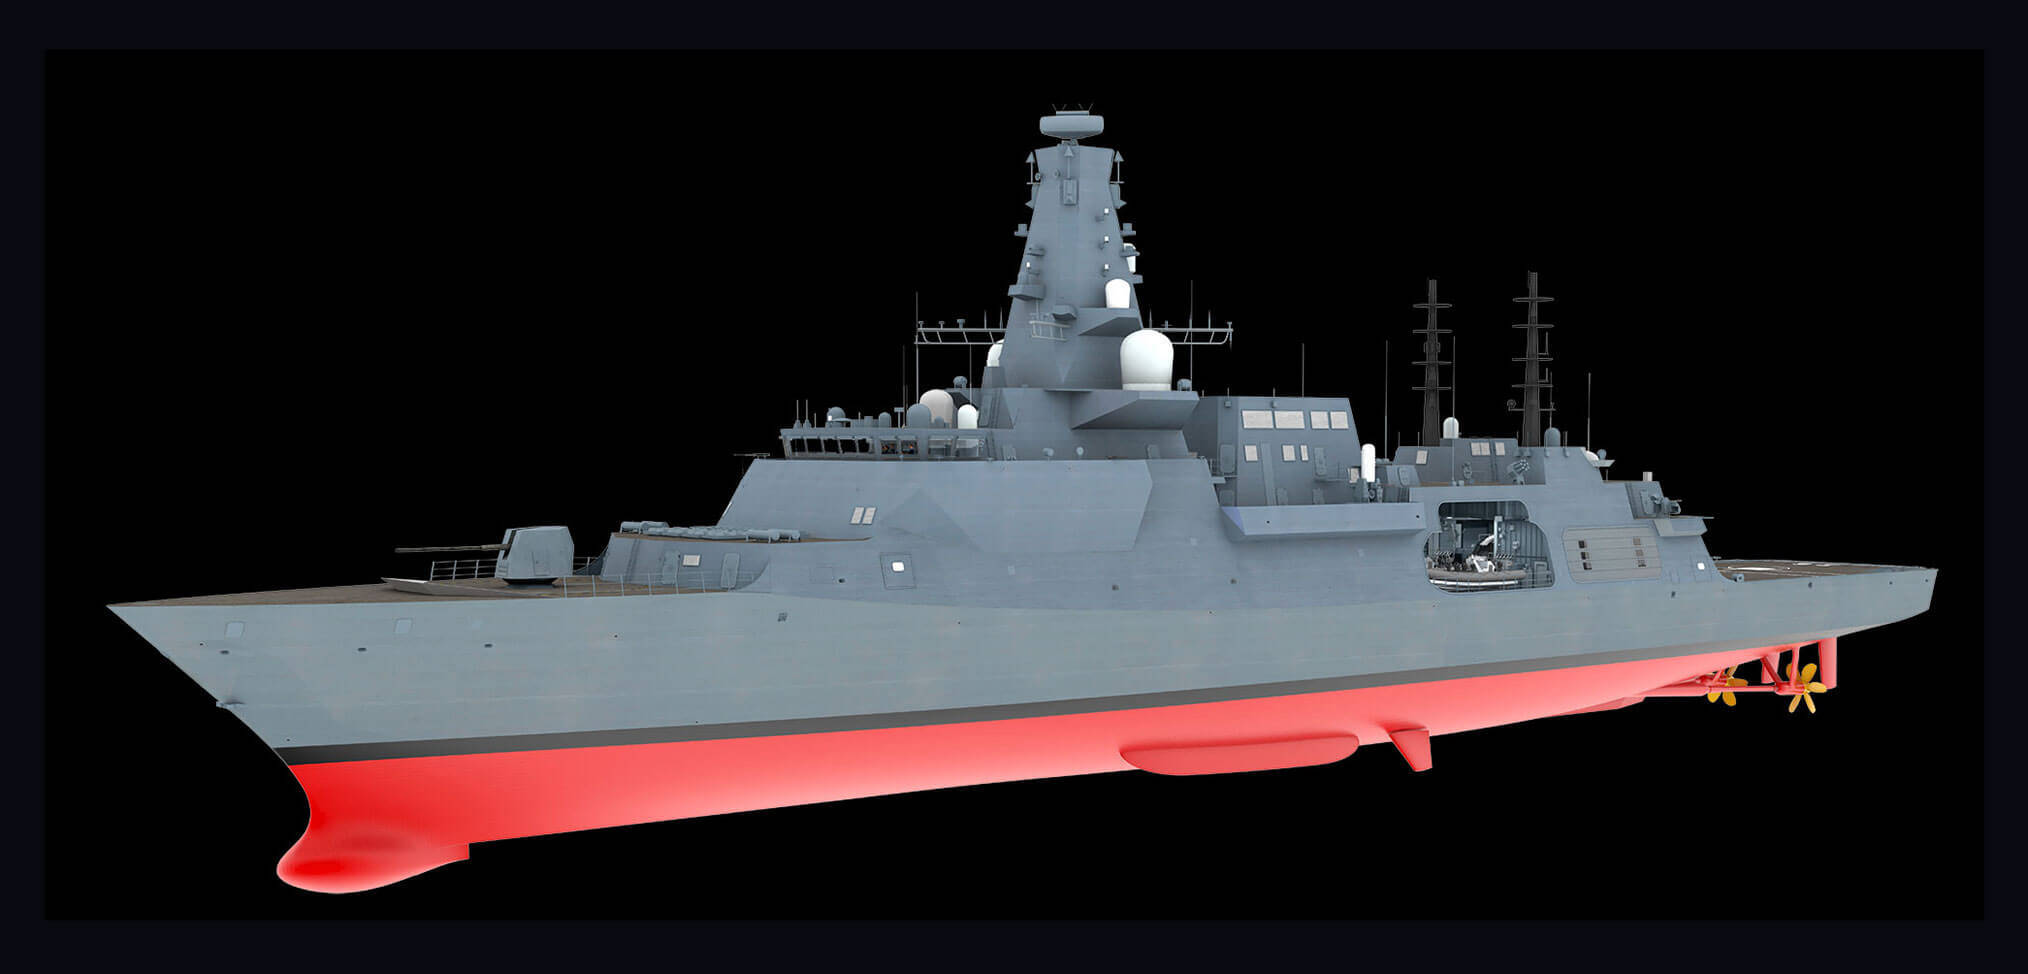 Why will the Royal Navy not have its first Type 26 frigate operational until 2027?